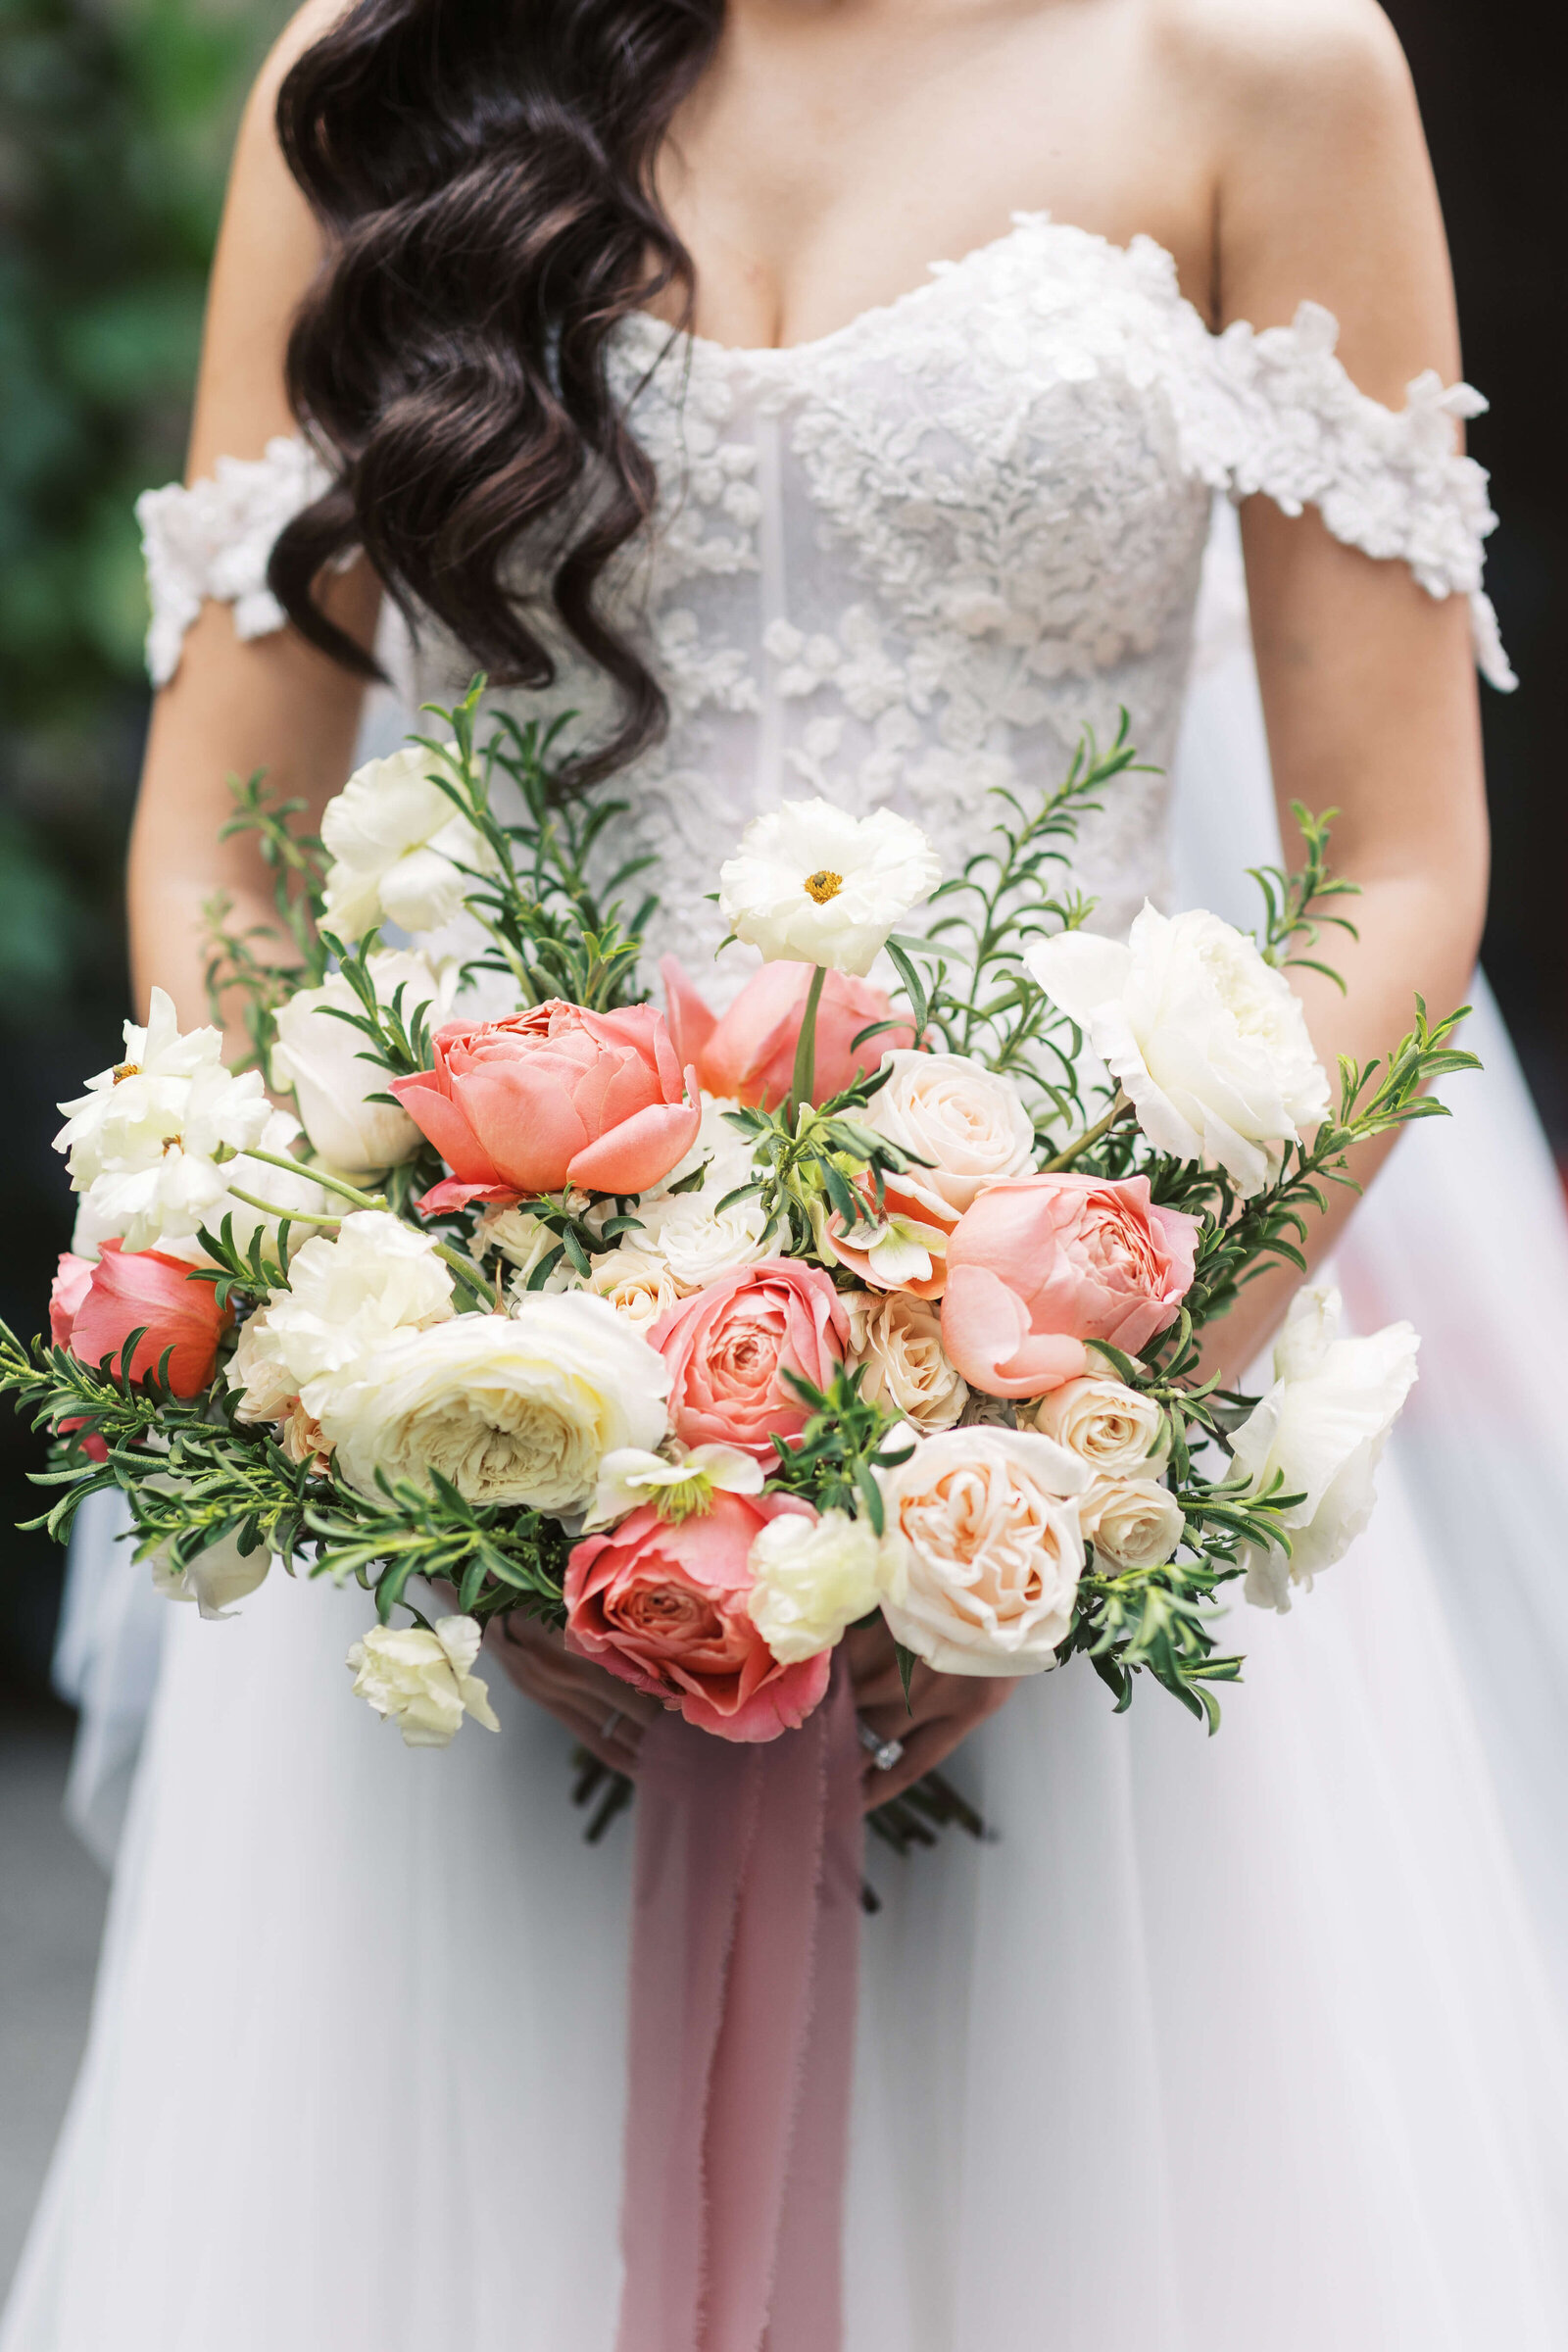 Bridal bouquet made of coral, and ivory flowers and greenery.